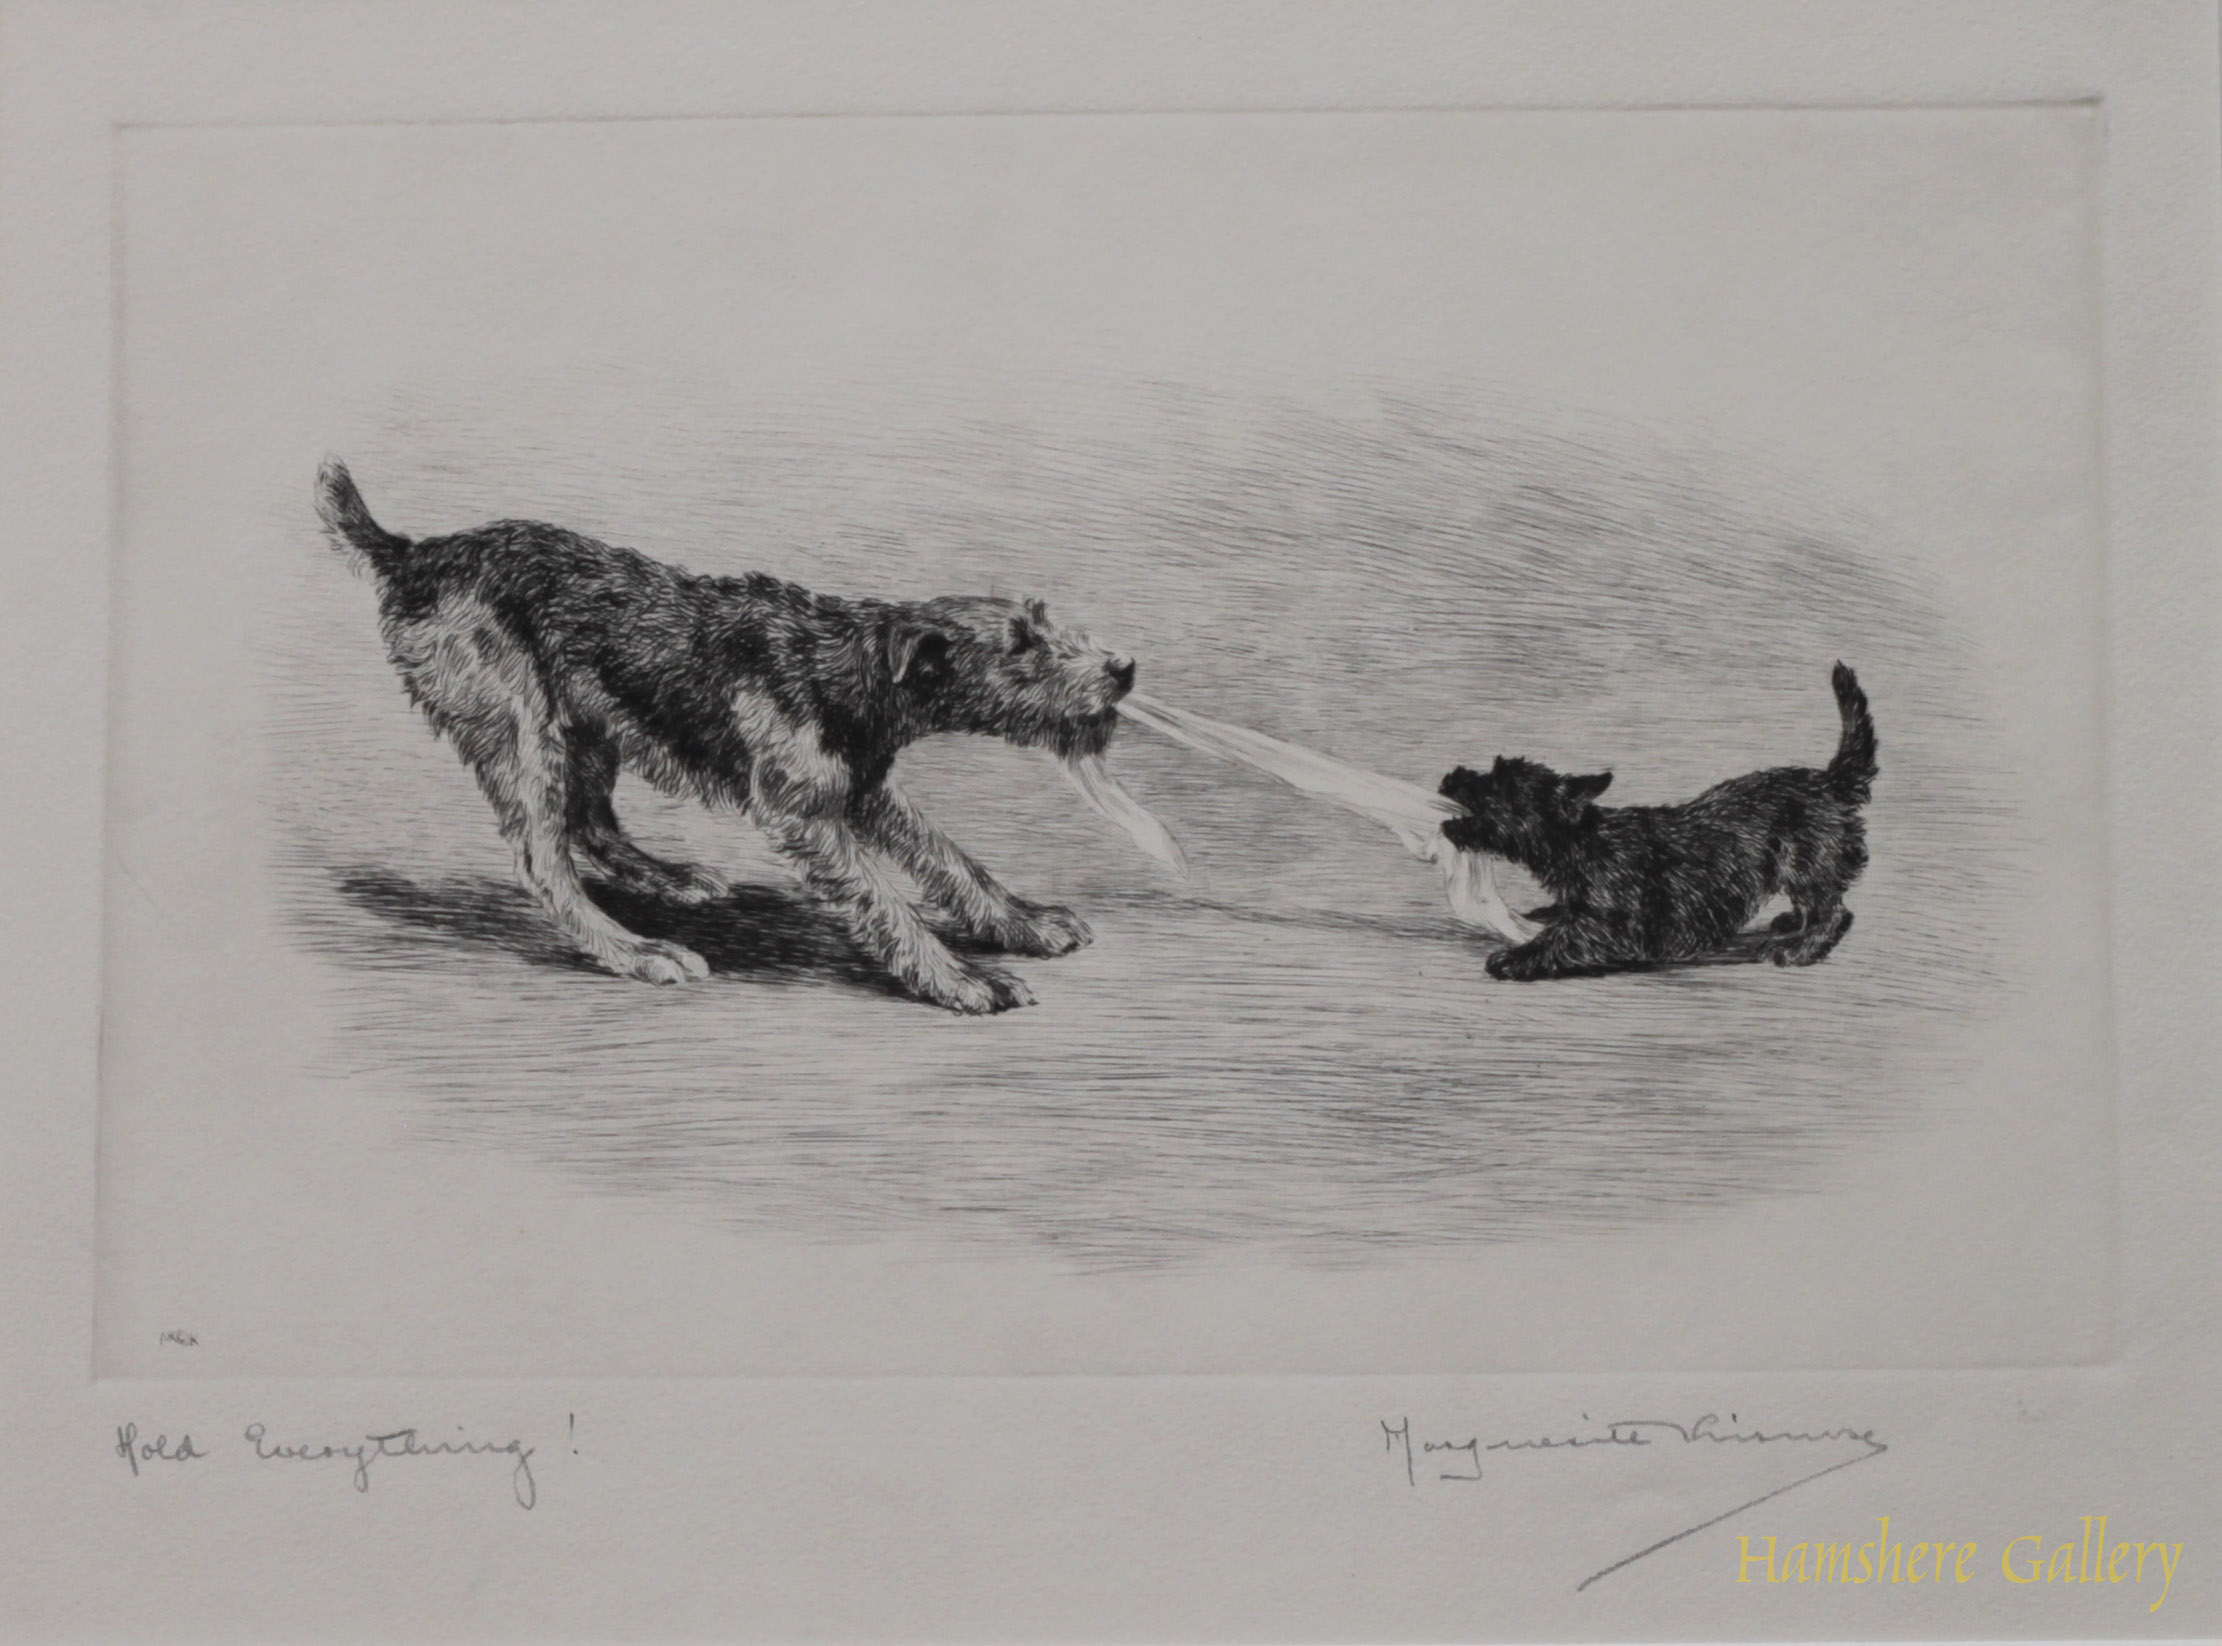 Click for larger image: Airedale and Scottish Terrier dry-point etching Hold Everything by Marguerite Kirmse - Airedale and Scottish Terrier dry-point etching Hold Everything by Marguerite Kirmse